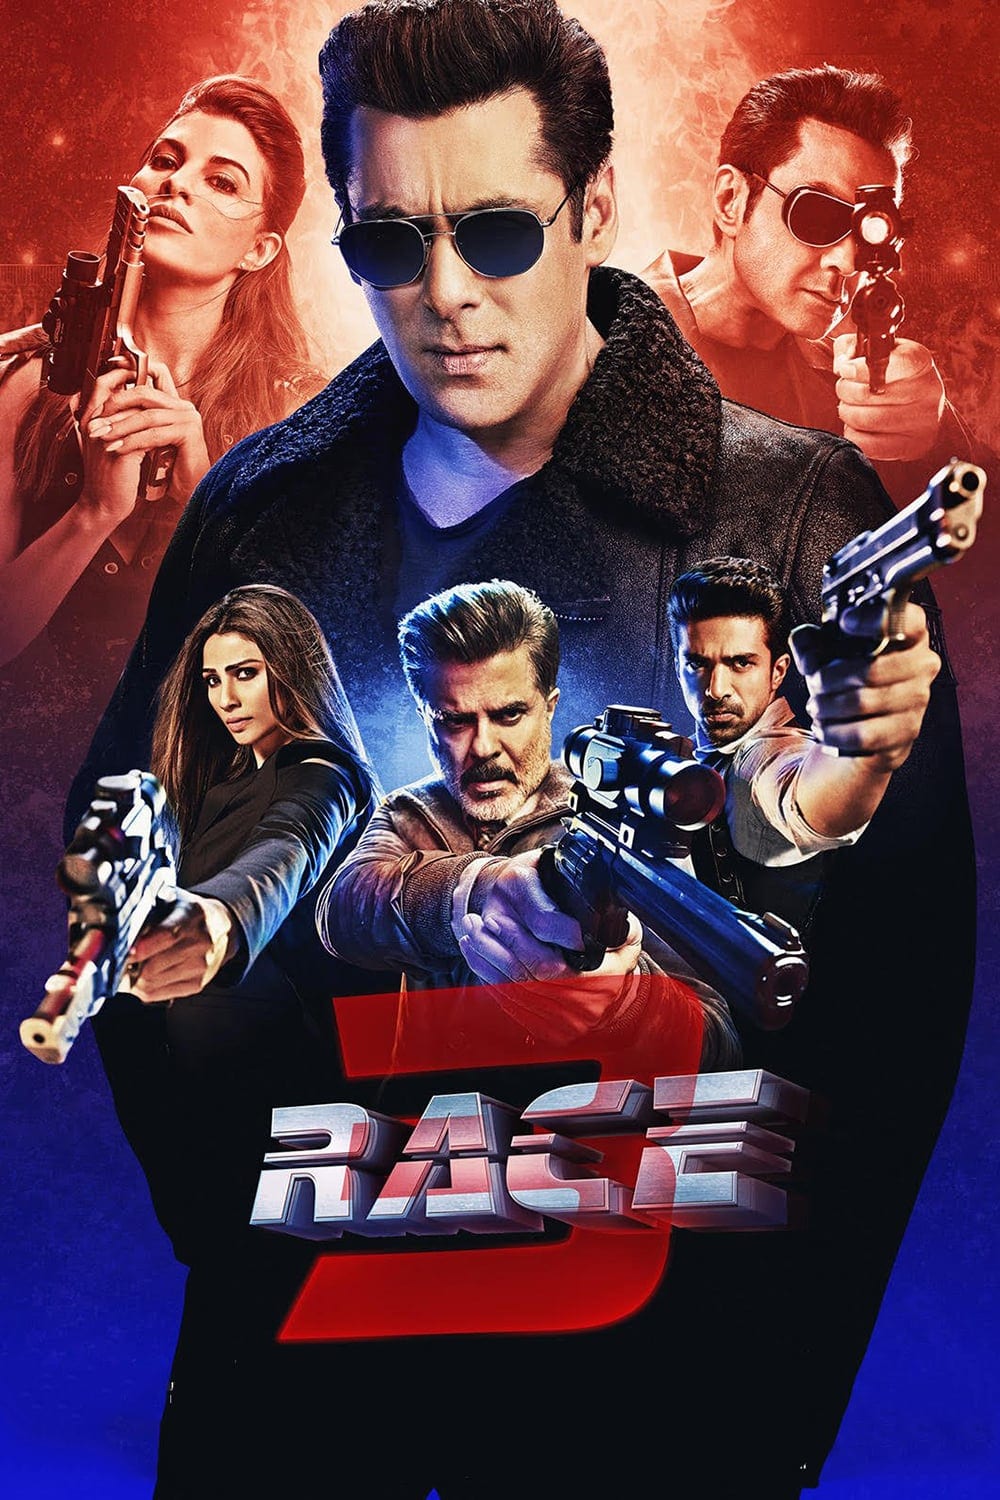 Poster for the movie "Race 3"